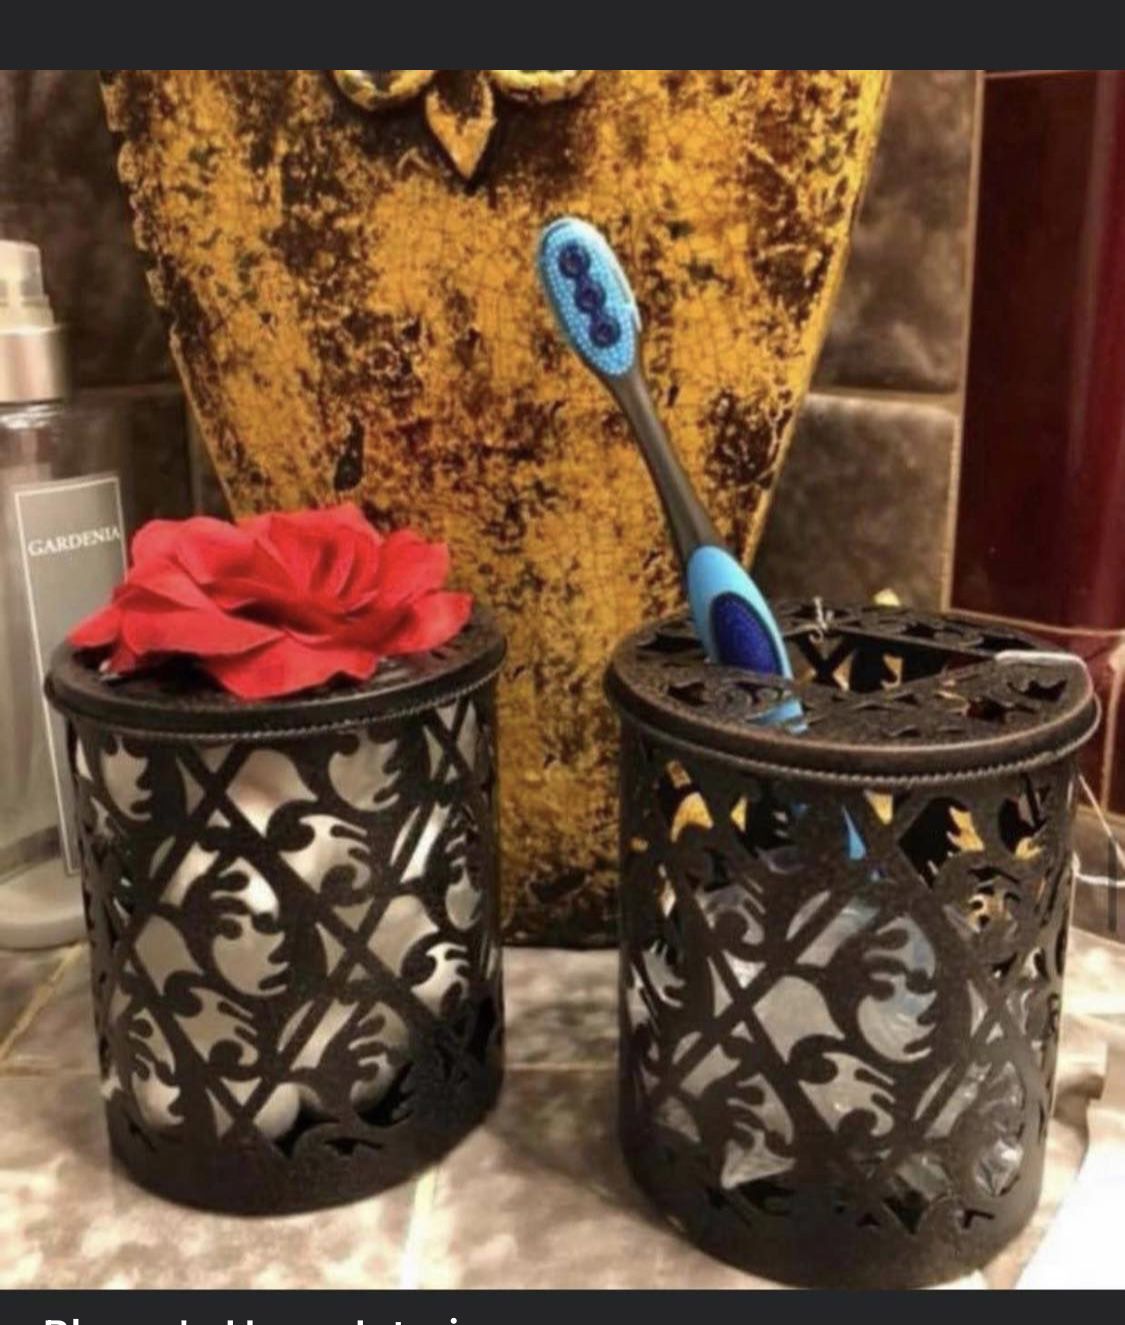 Home Interiors & gifts filigree design metal candle holders lidded